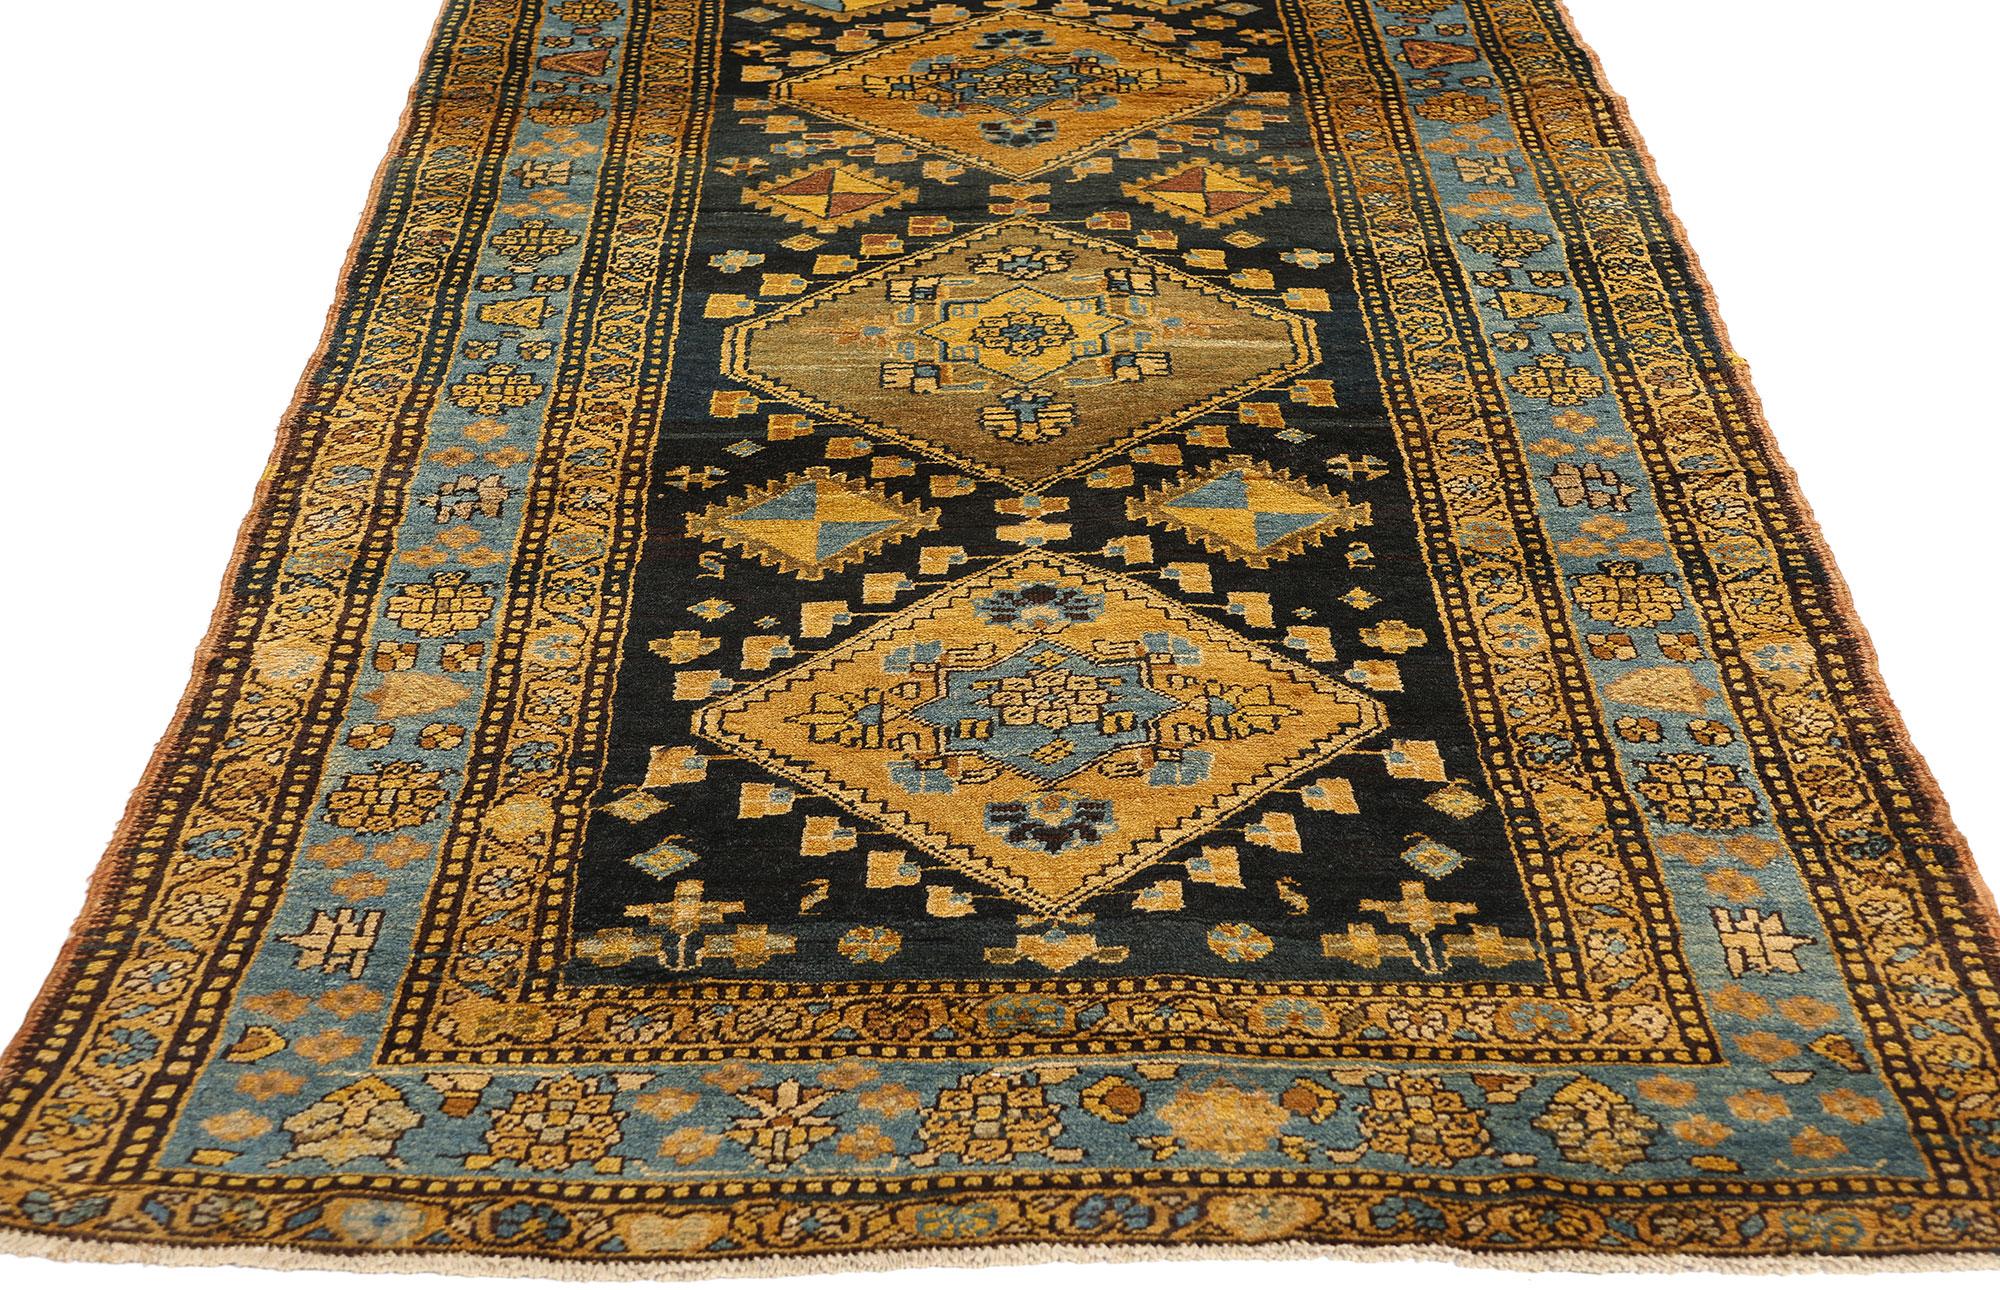 73326 Antique Persian Sarab Rug Runner, 03'05 x 11'06. Persian Sarab rugs and carpet runners hail from the northwest reaches of Iran and are renowned for their exceptional artisanship, intricate patterns, and premium materials. Typically fashioned